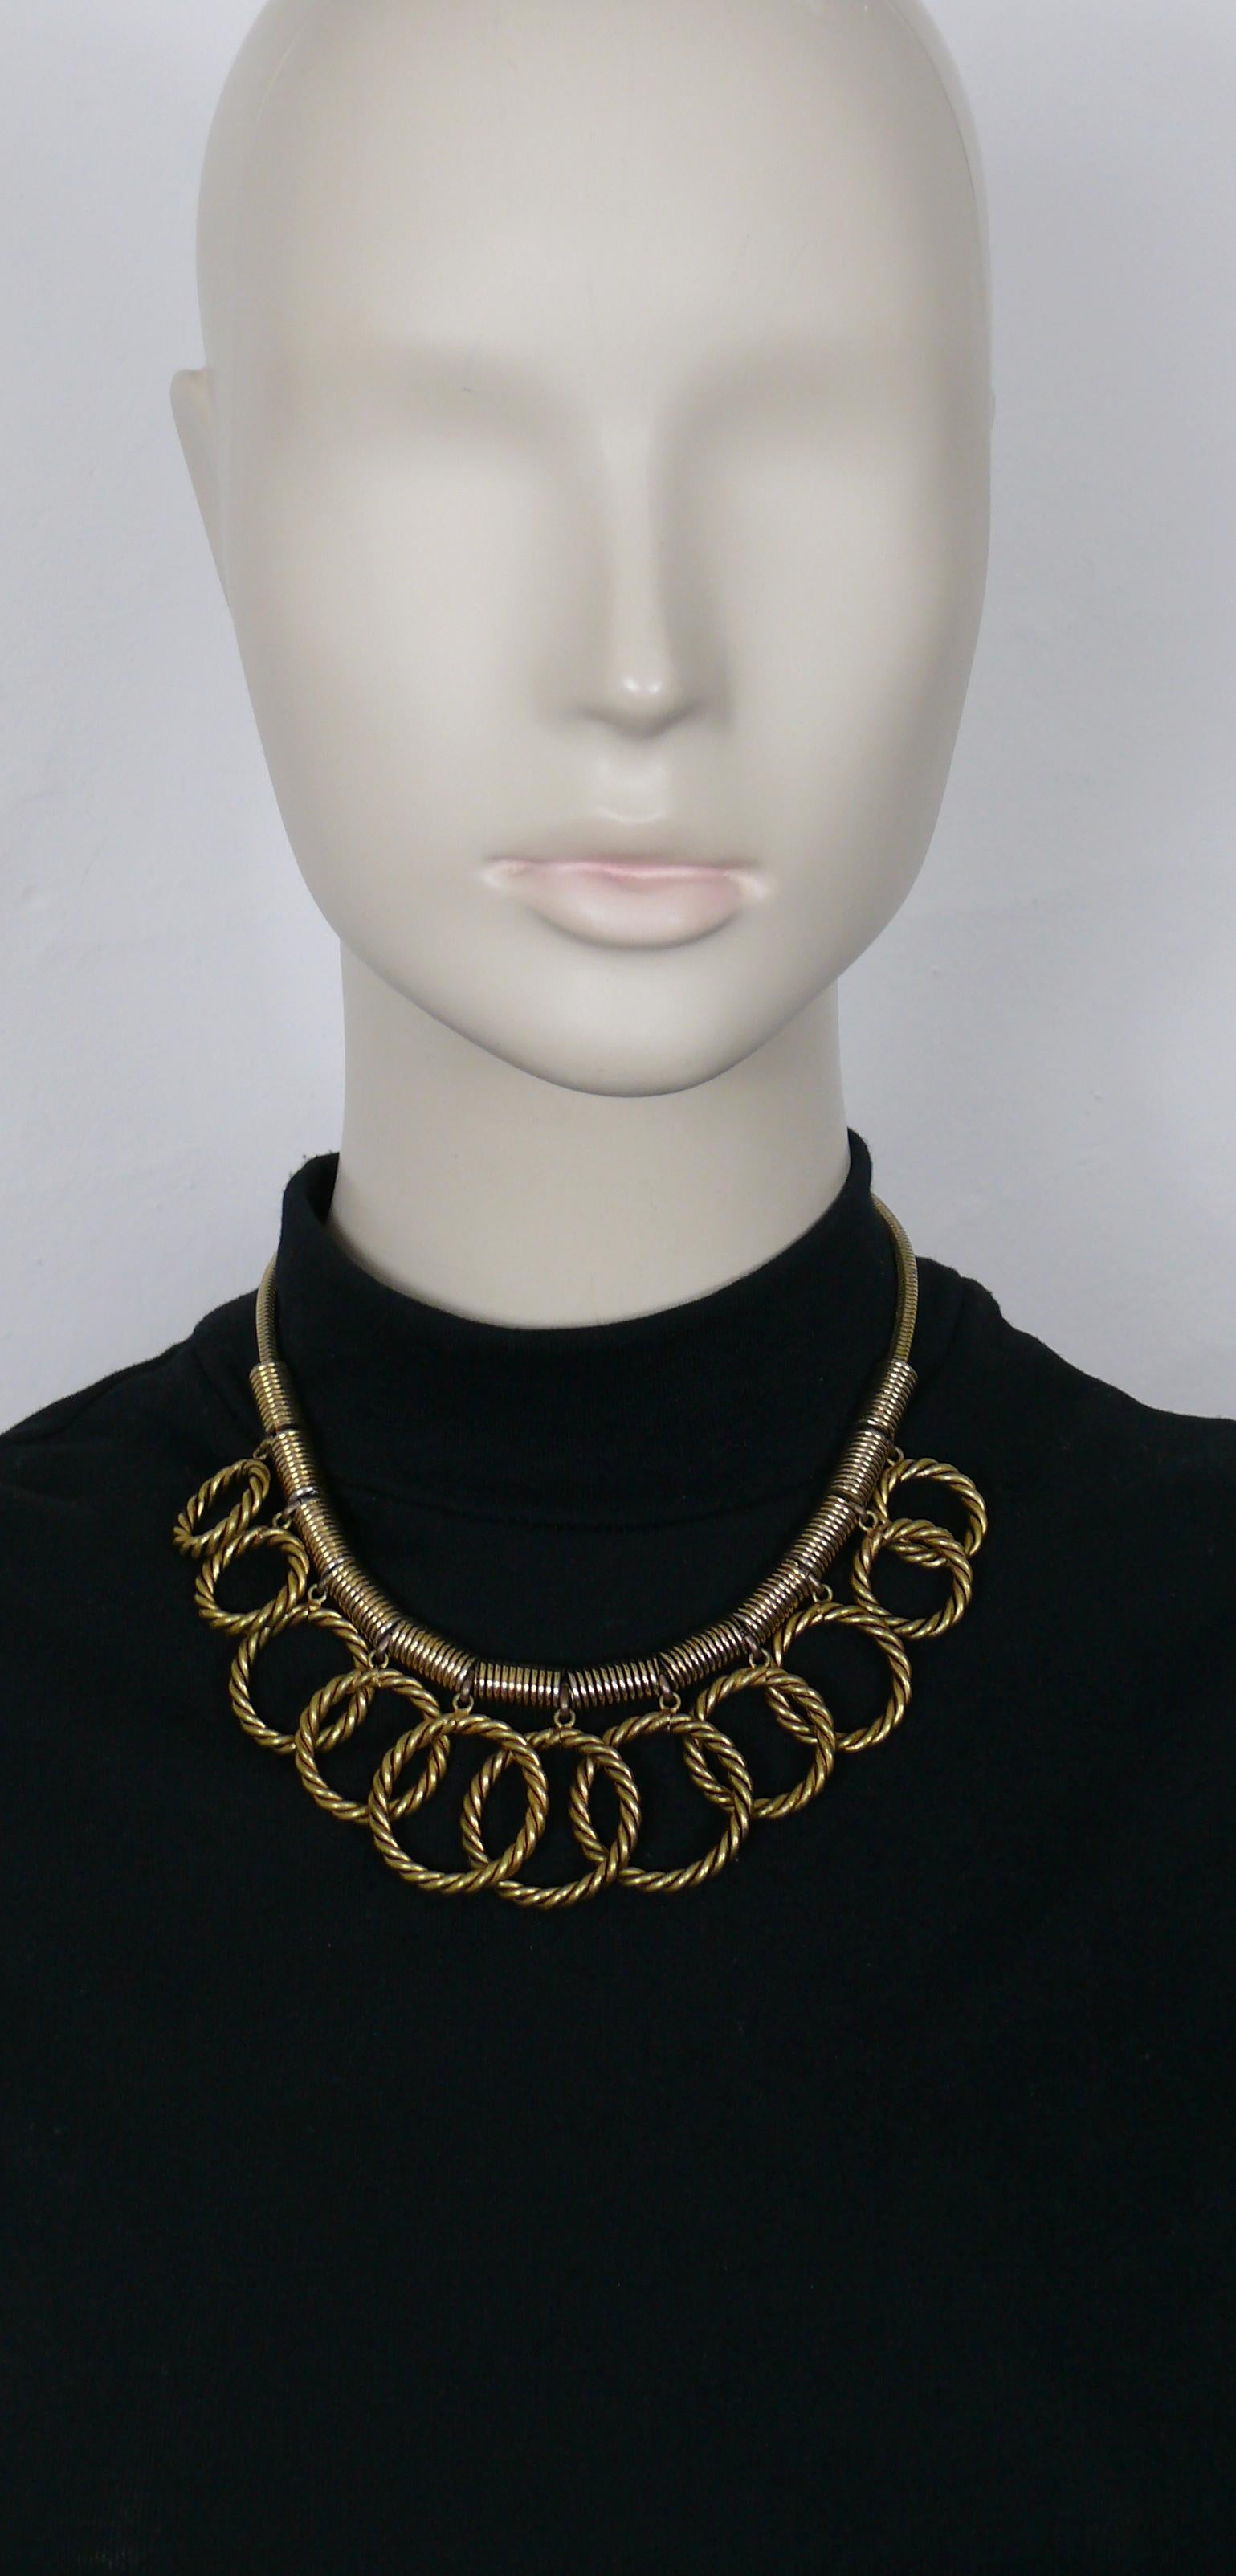 YVES SAINT LAURENT vintage gold toned necklace featuring eleven graduated twisted circles charms.

Adustable hook closure.

Embossed YSL FRANCE on the S hook.

Indicative mesaurements : adjustable length from approx. 41 cm (16.14 inches) to approx.